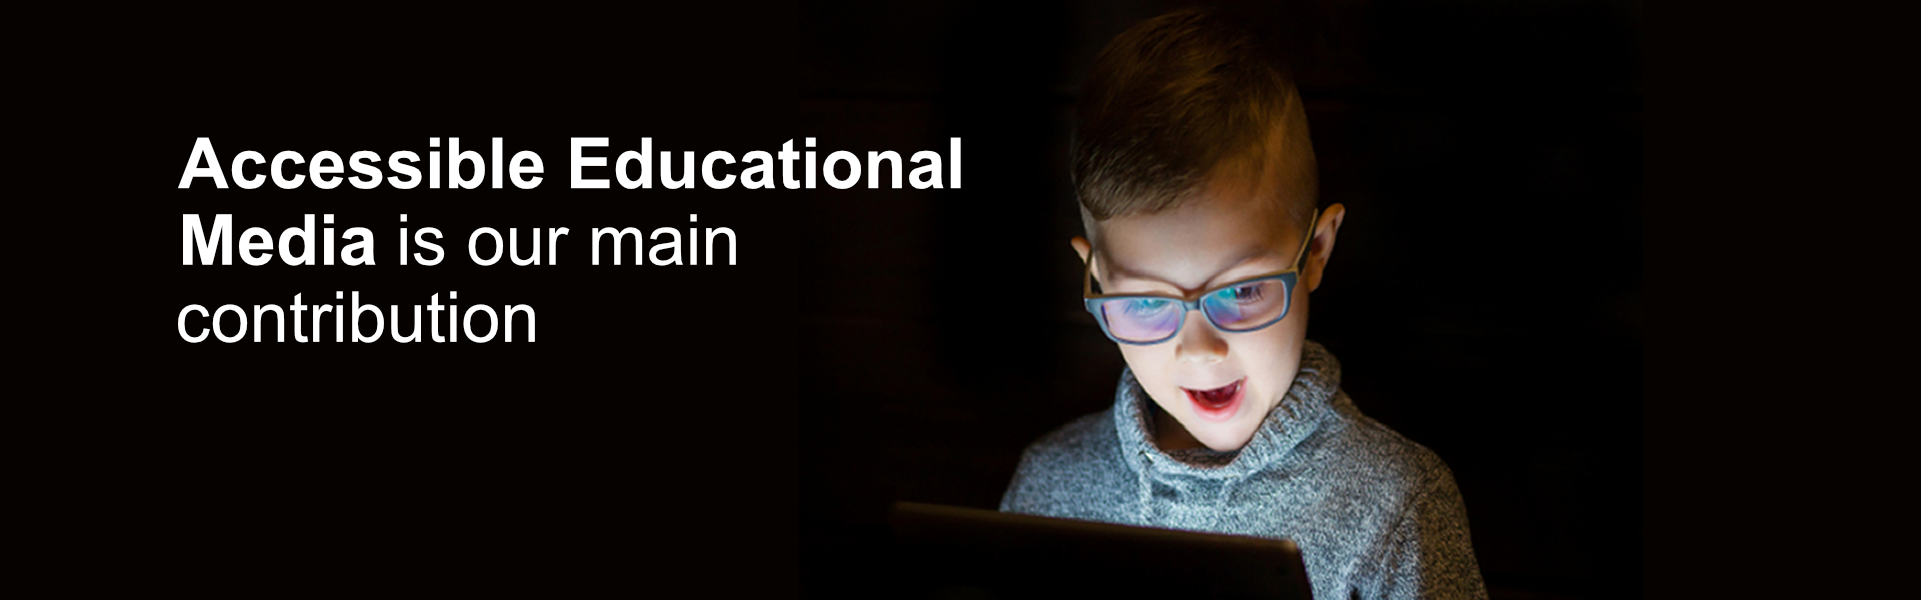 Accessible Educational Media is our main contribution. Background image: a kid looks at a tablet with awe. 